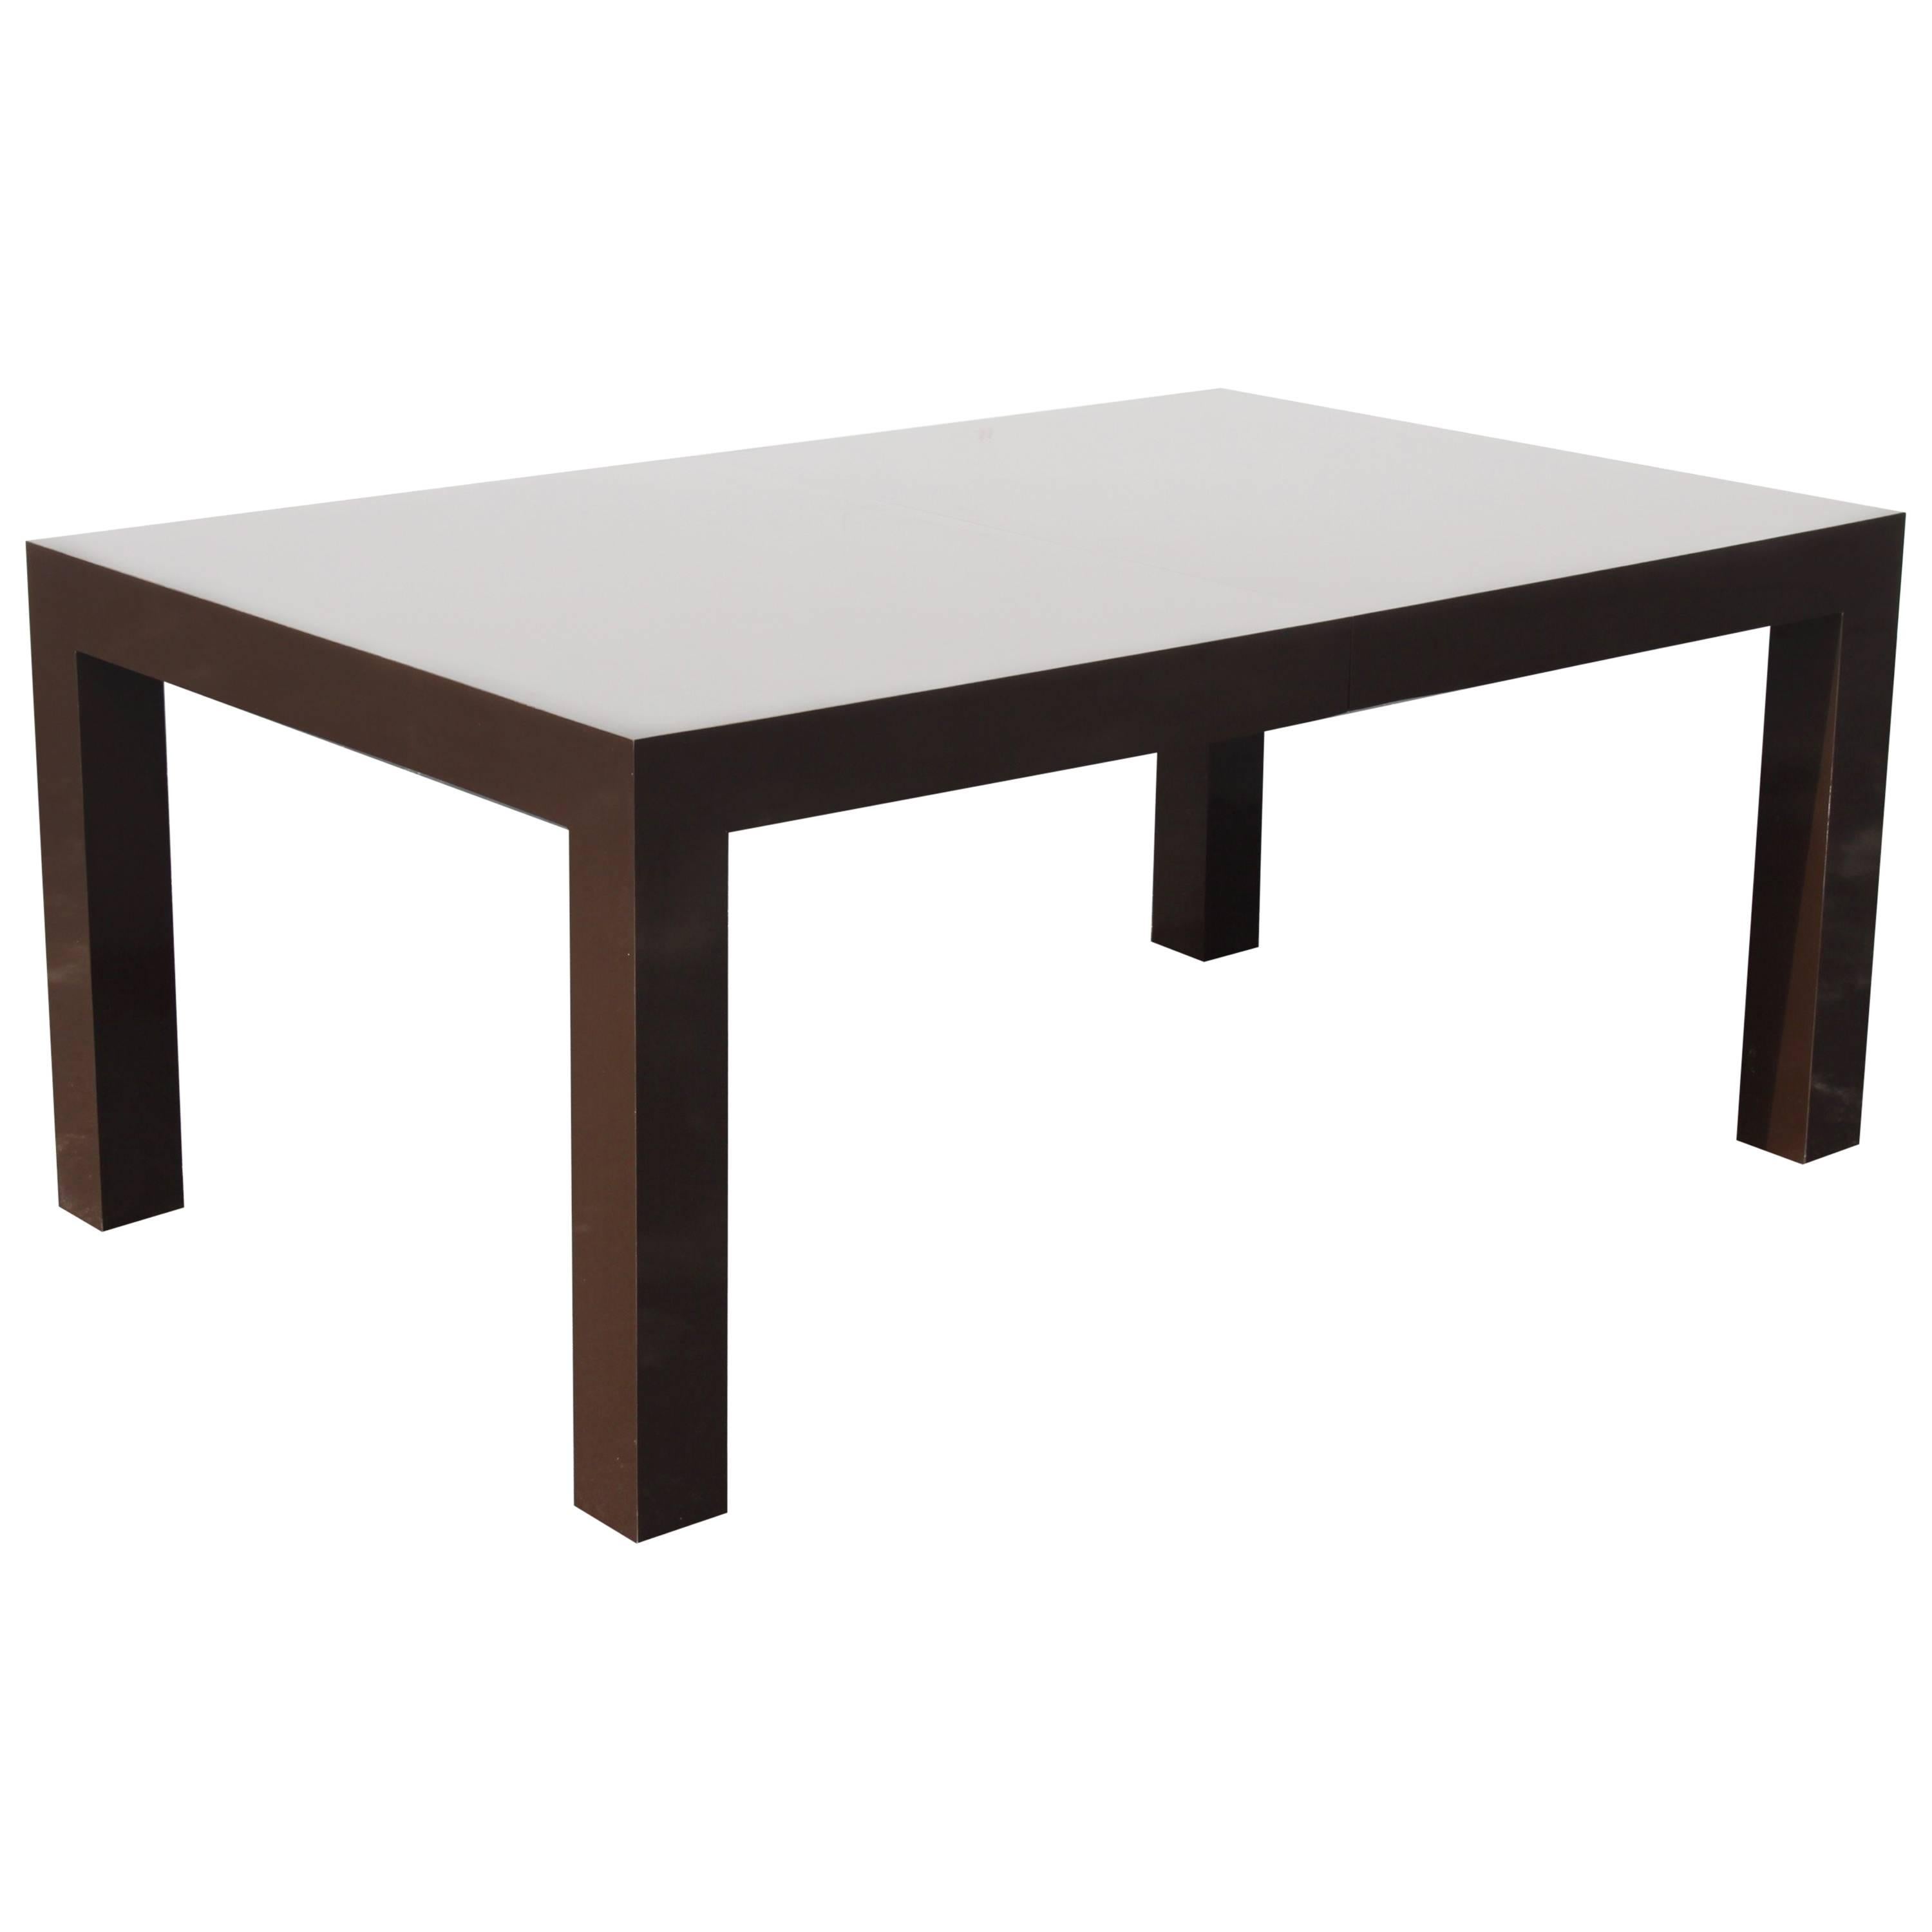 Milo Baughman for Thayer Coggin large chocolate laminate Parsons dining table with two 20